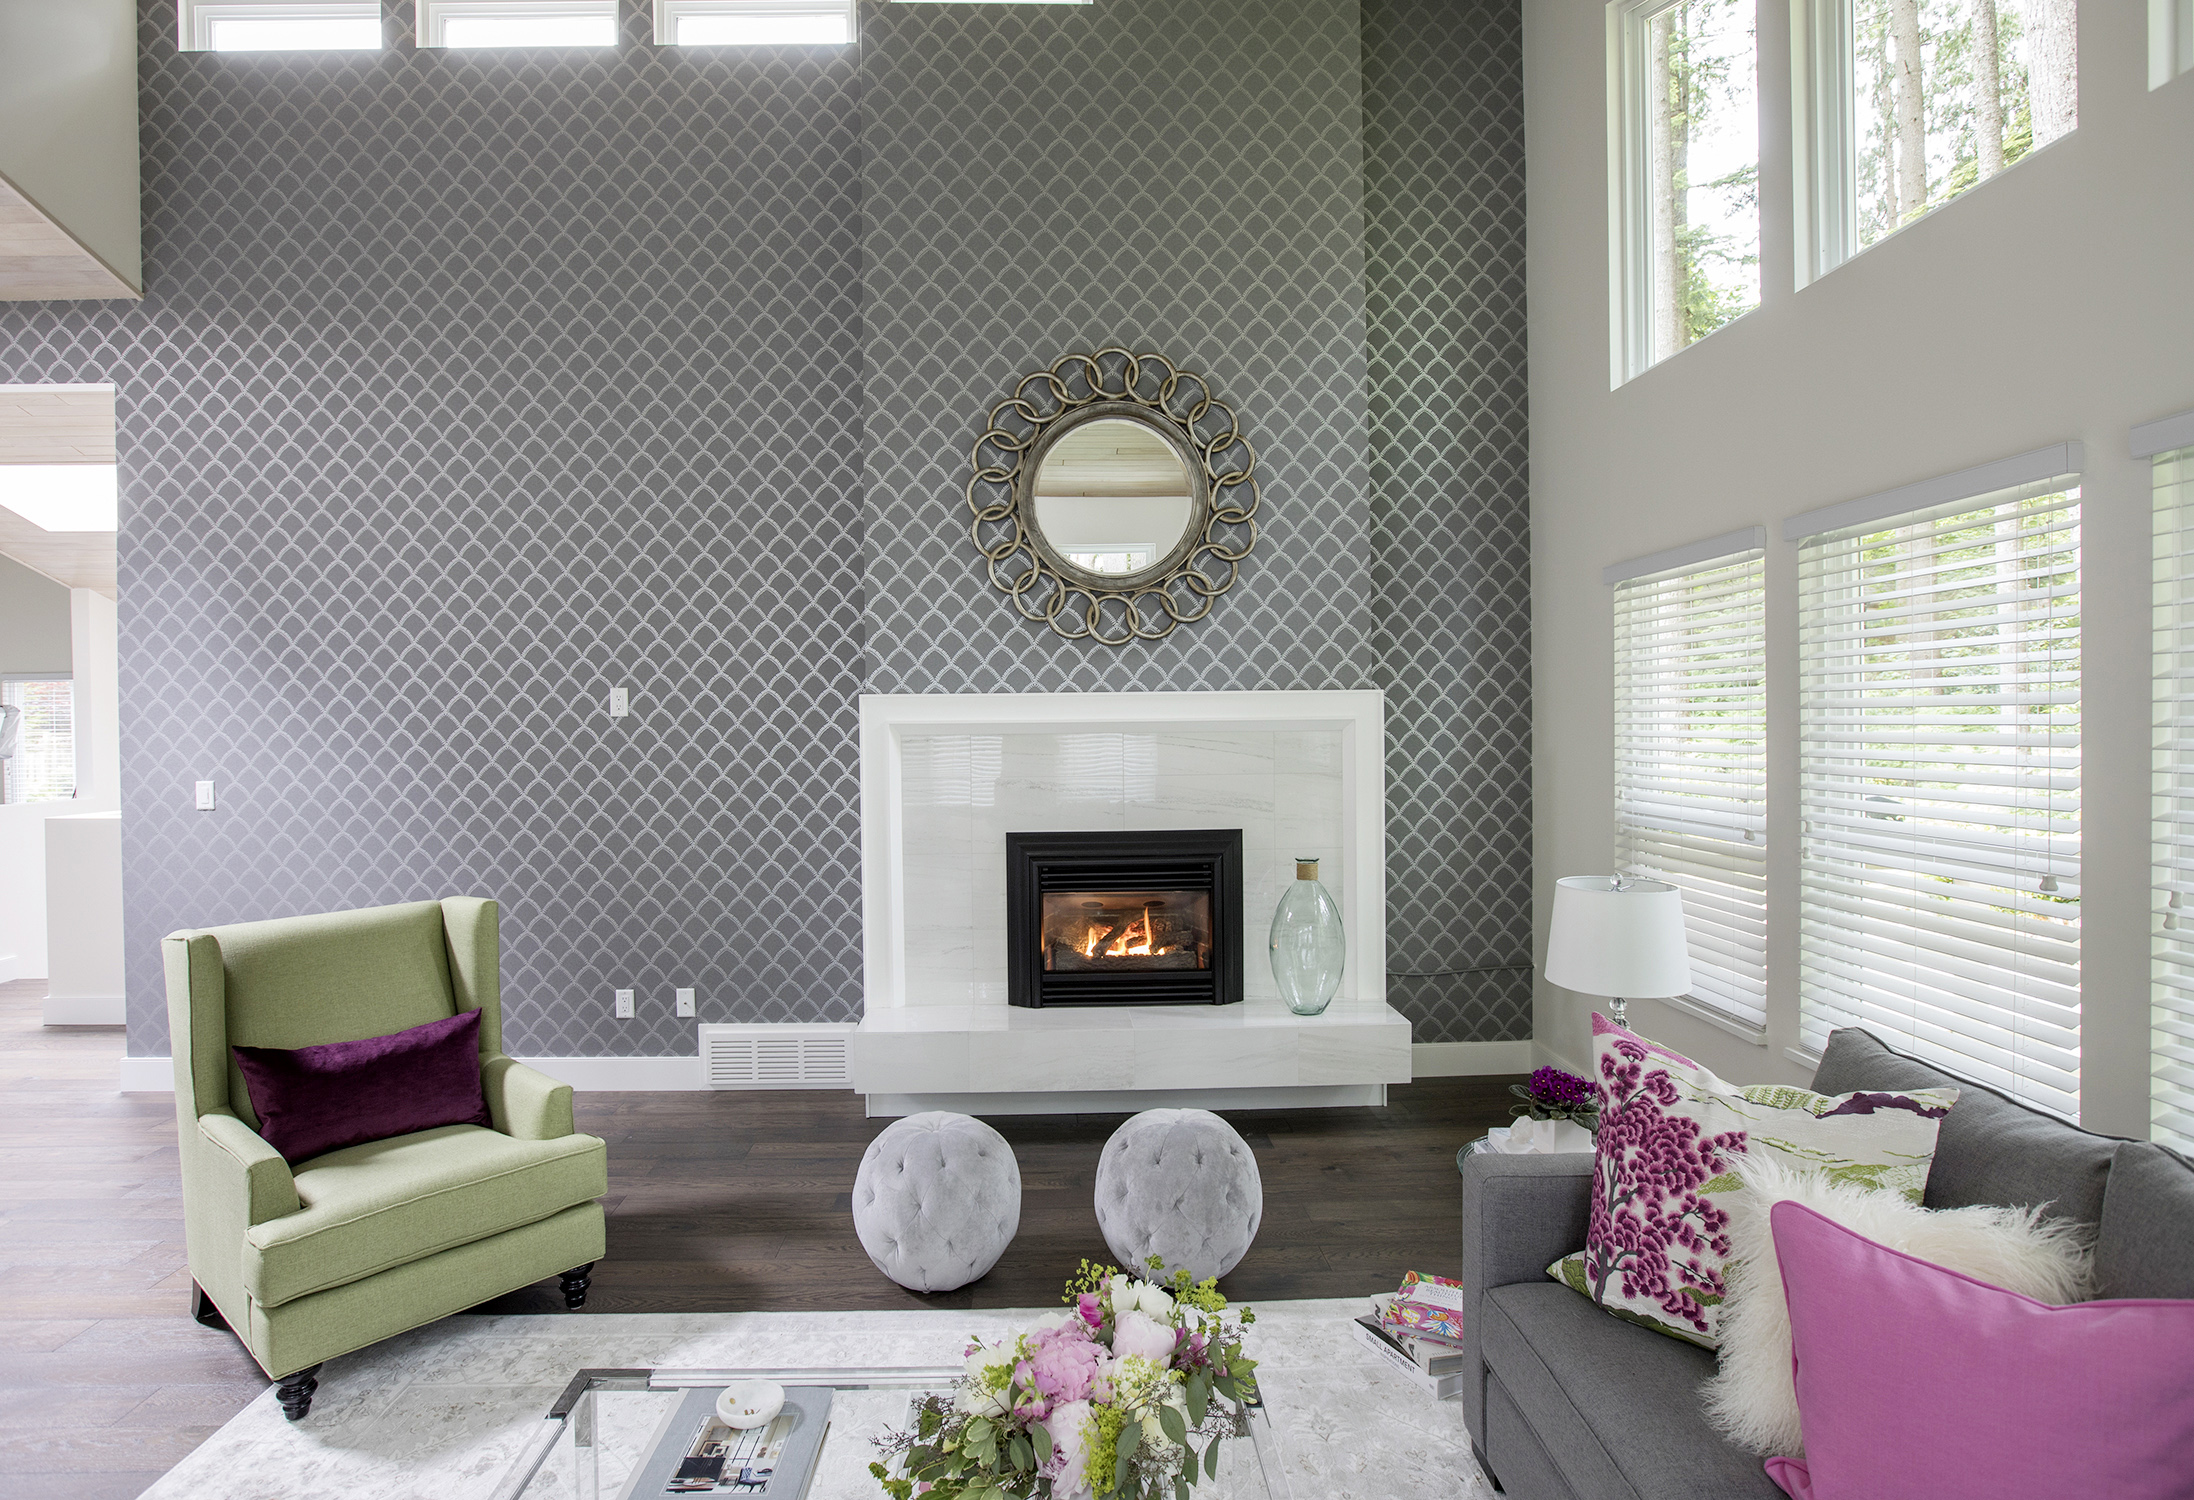 High-shine glass and white, marble-like porcelain tiles are showcased in this sleek gas fireplace.